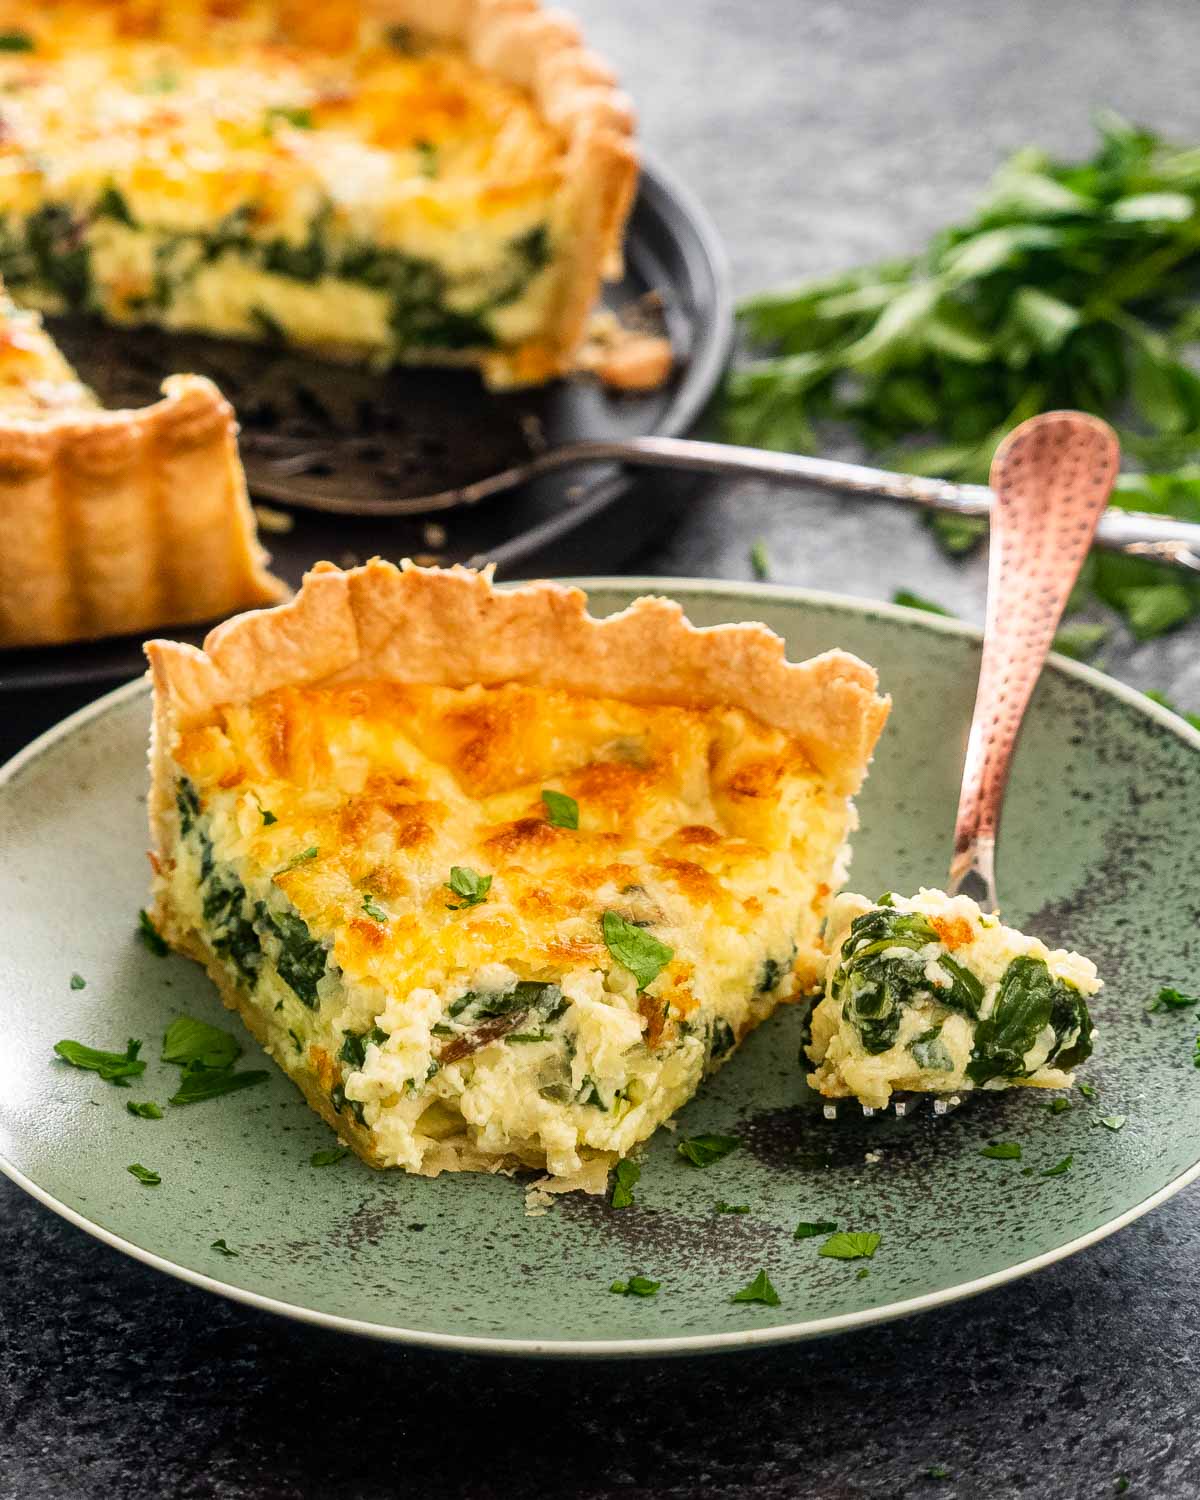 a slice of quiche florentine on a green plate.